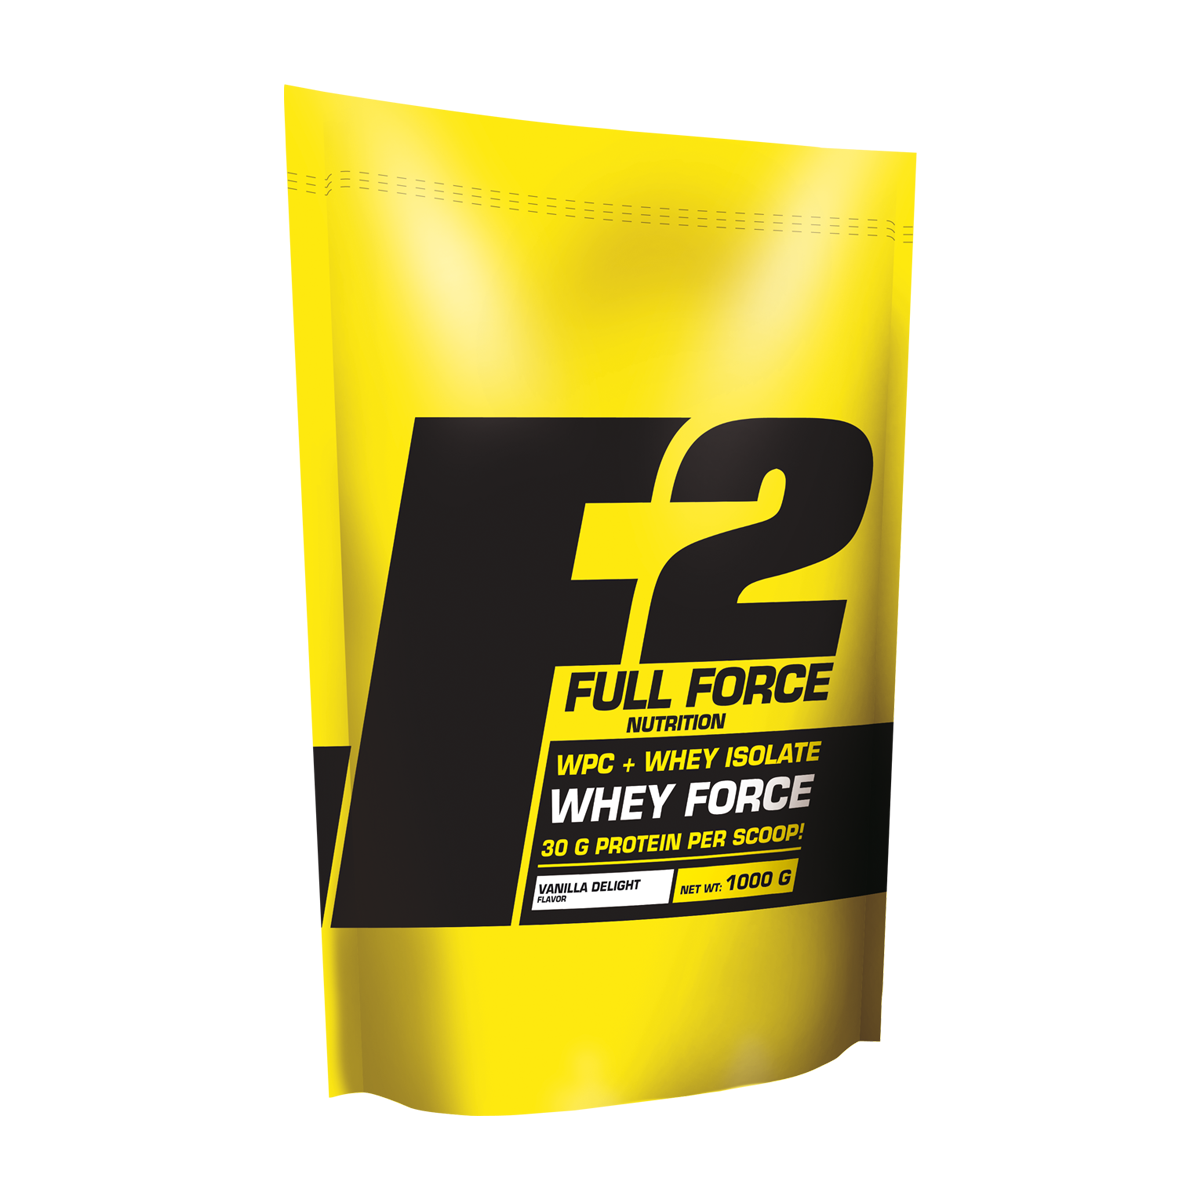 F2 Full Force Nutrition Whey Force ( 1000 gr)